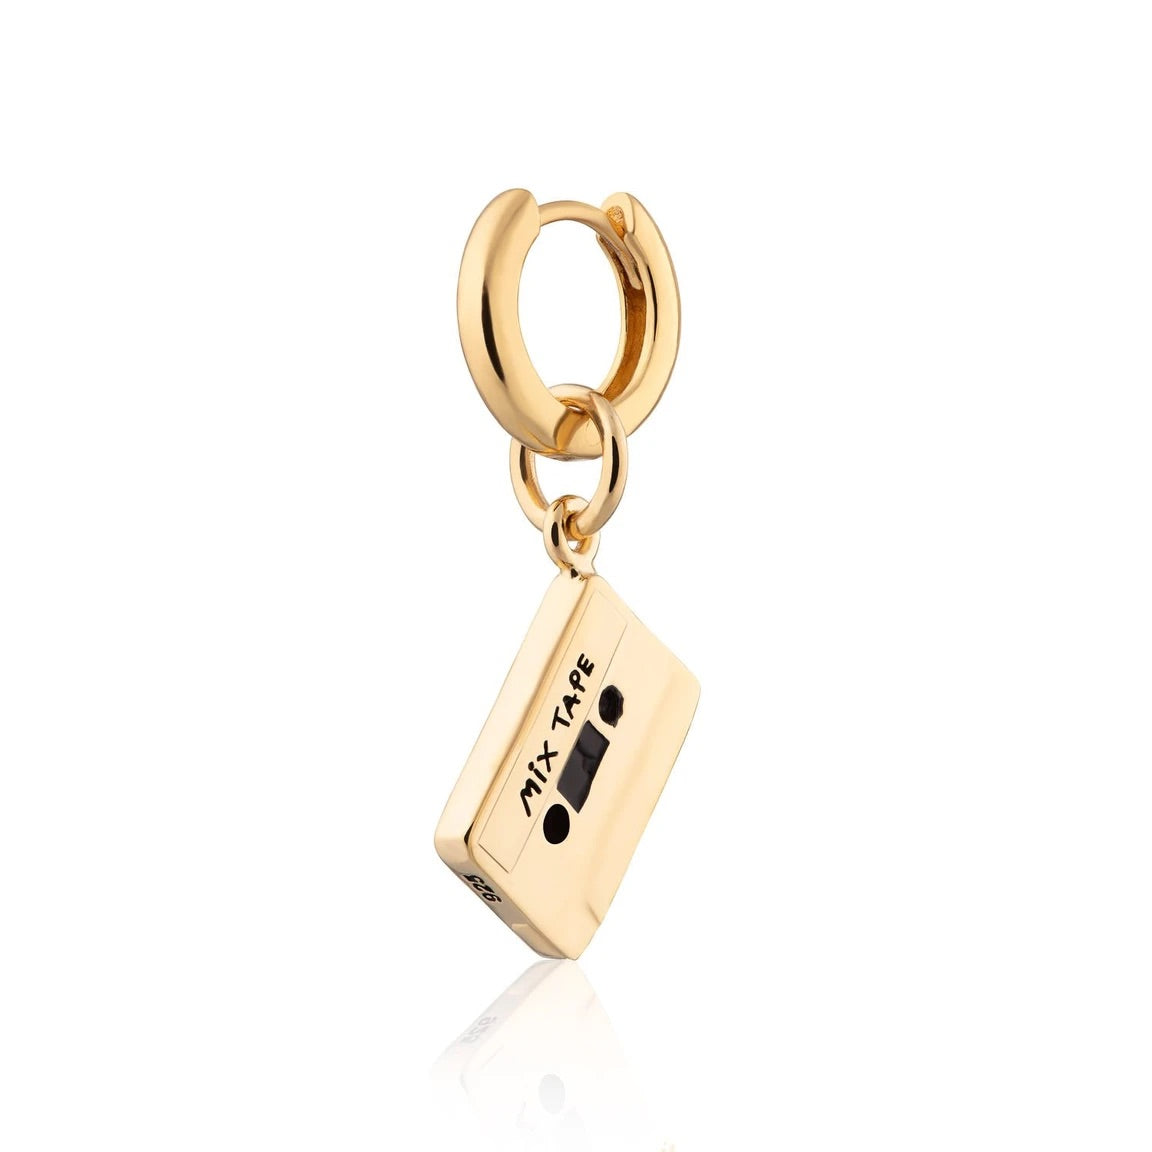 Mix Tape Huggie single earring - Gold Plated